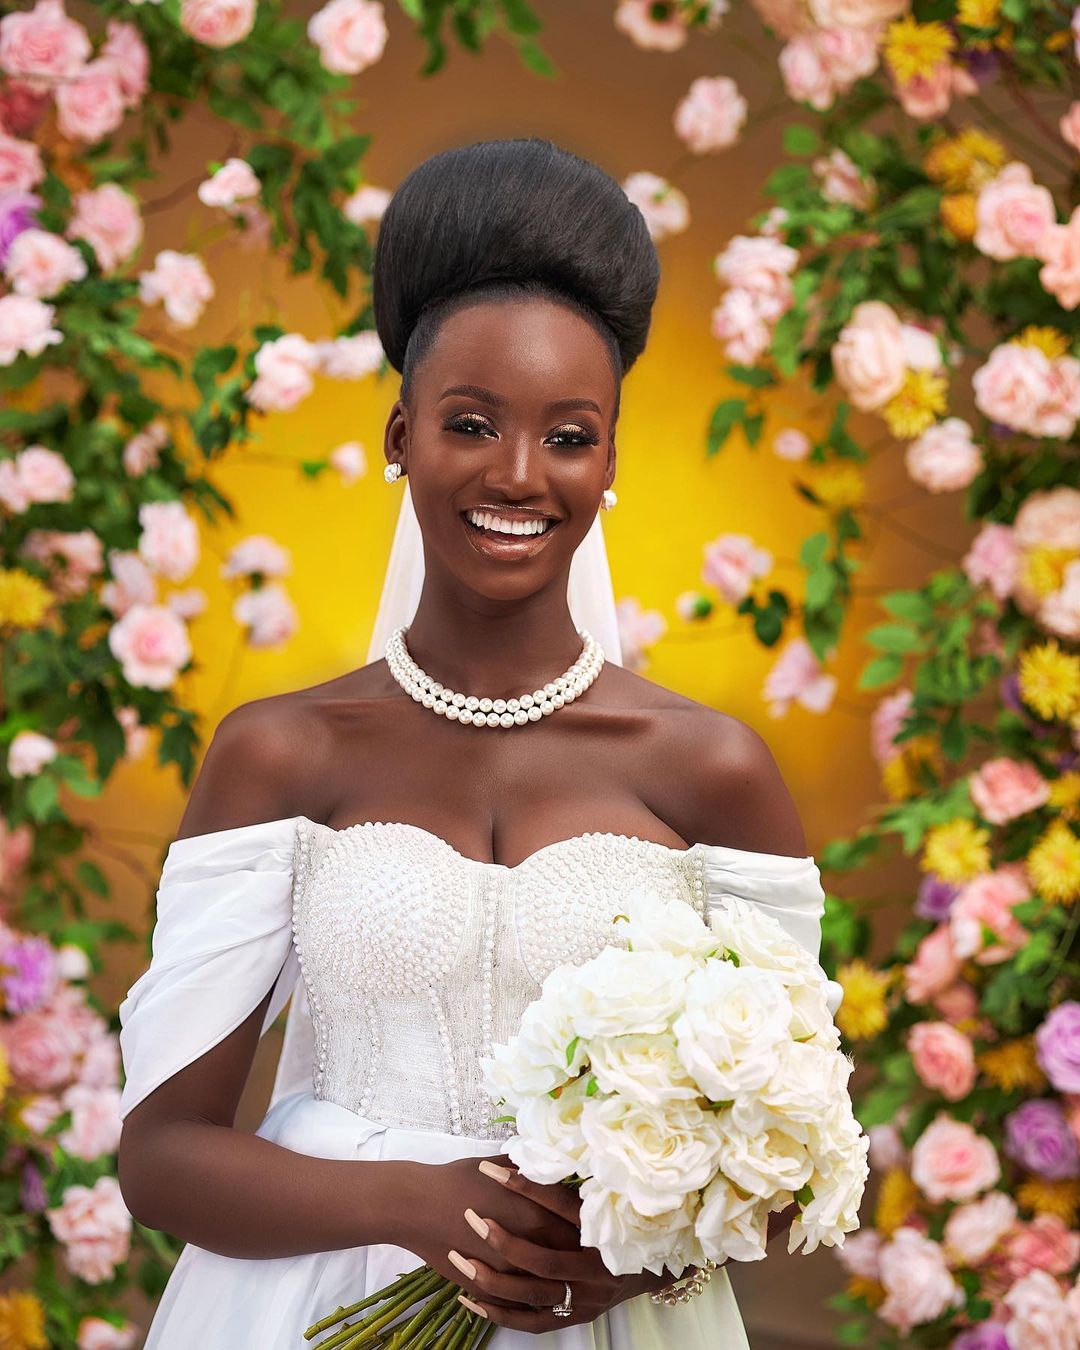 Channel Easy Magnificence on Your Massive Day With This Alluring Bridal Inspo